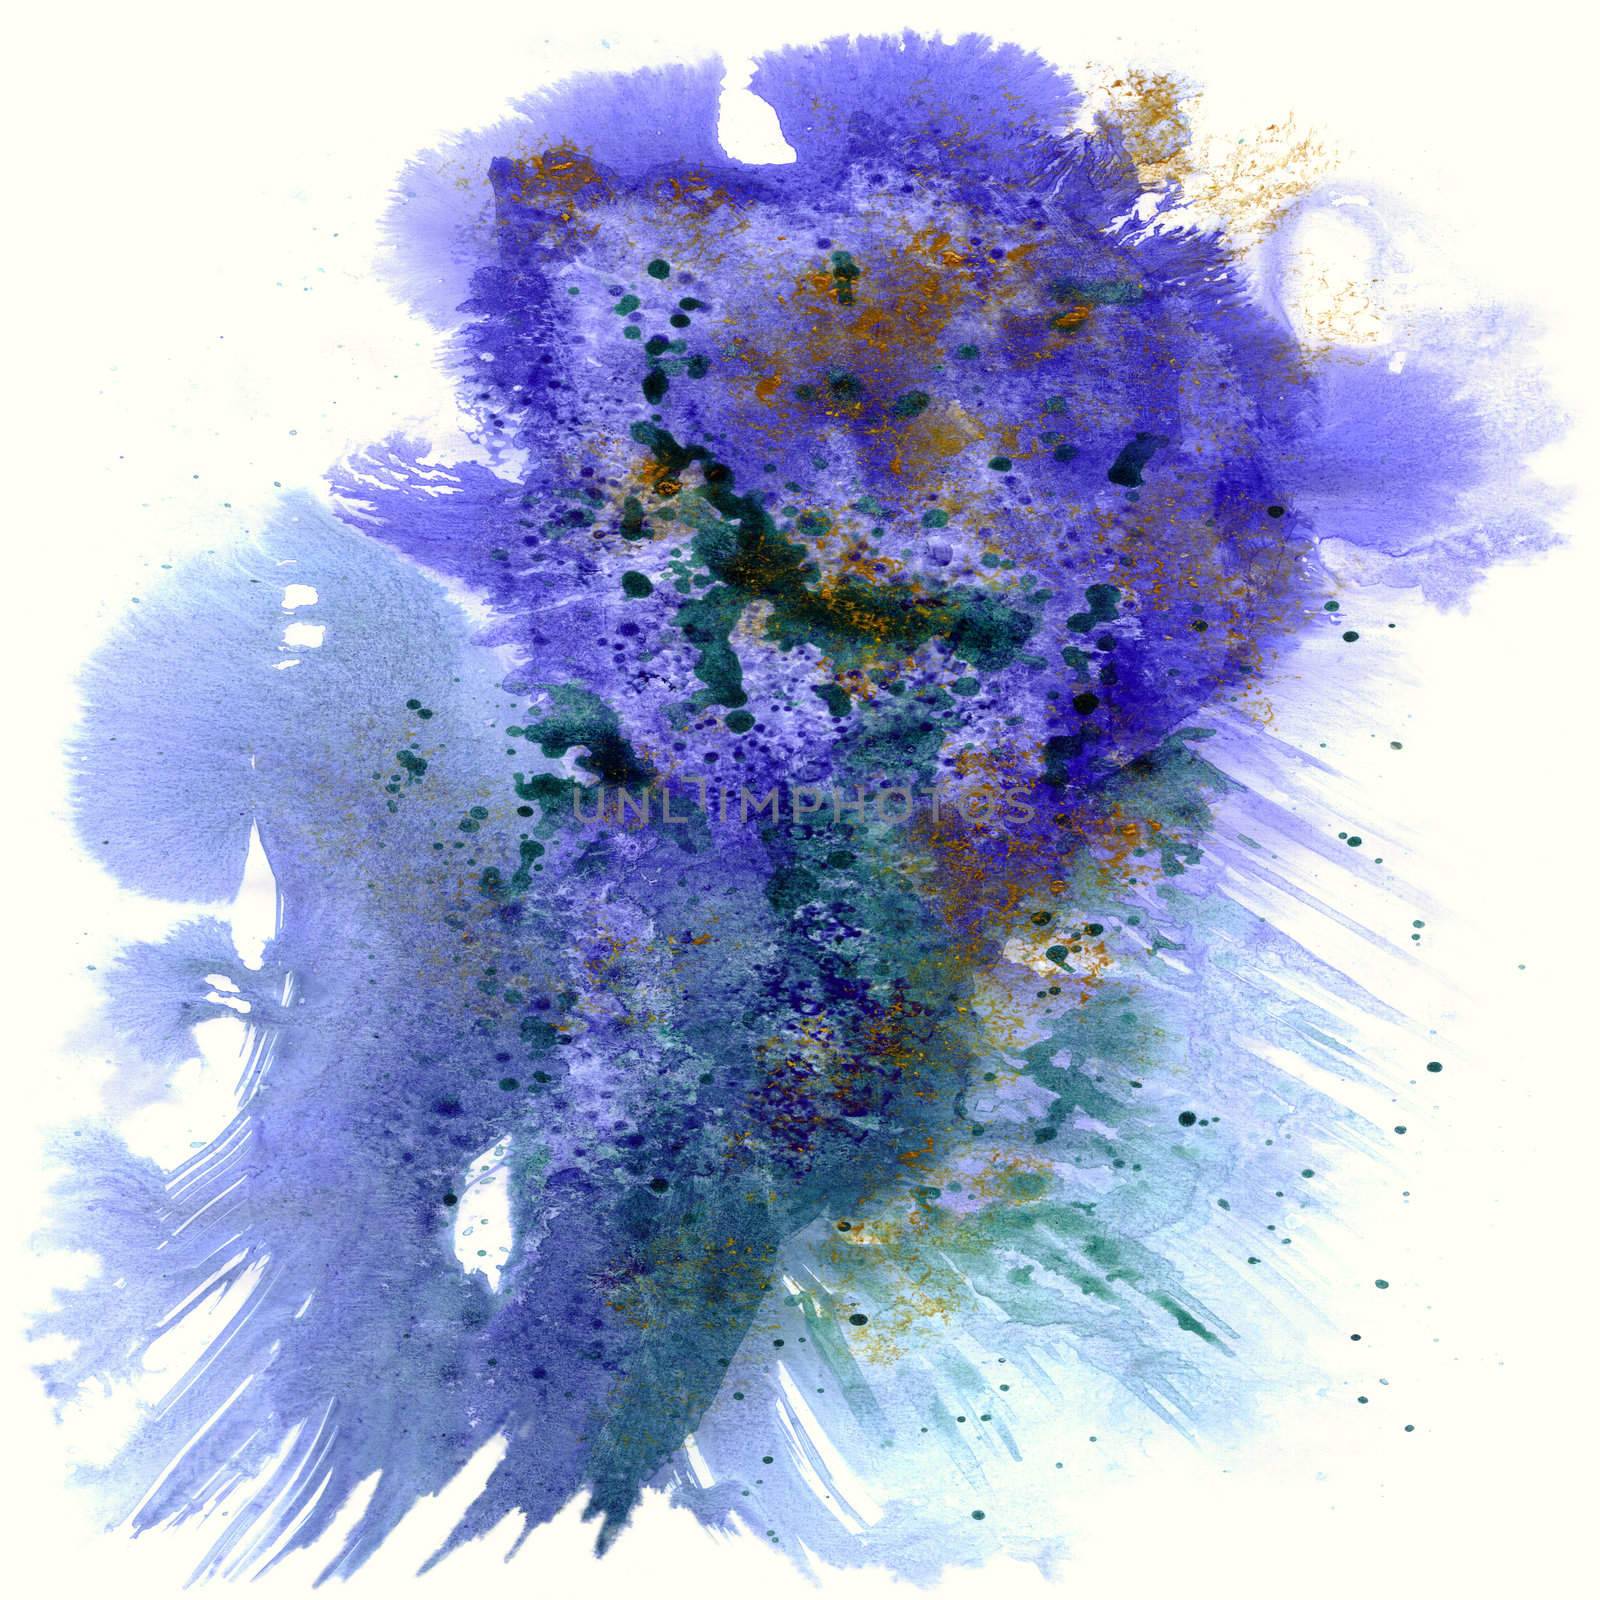 Abstract background, watercolor, hand painted on a paper. Blue, violet, green, orange, white